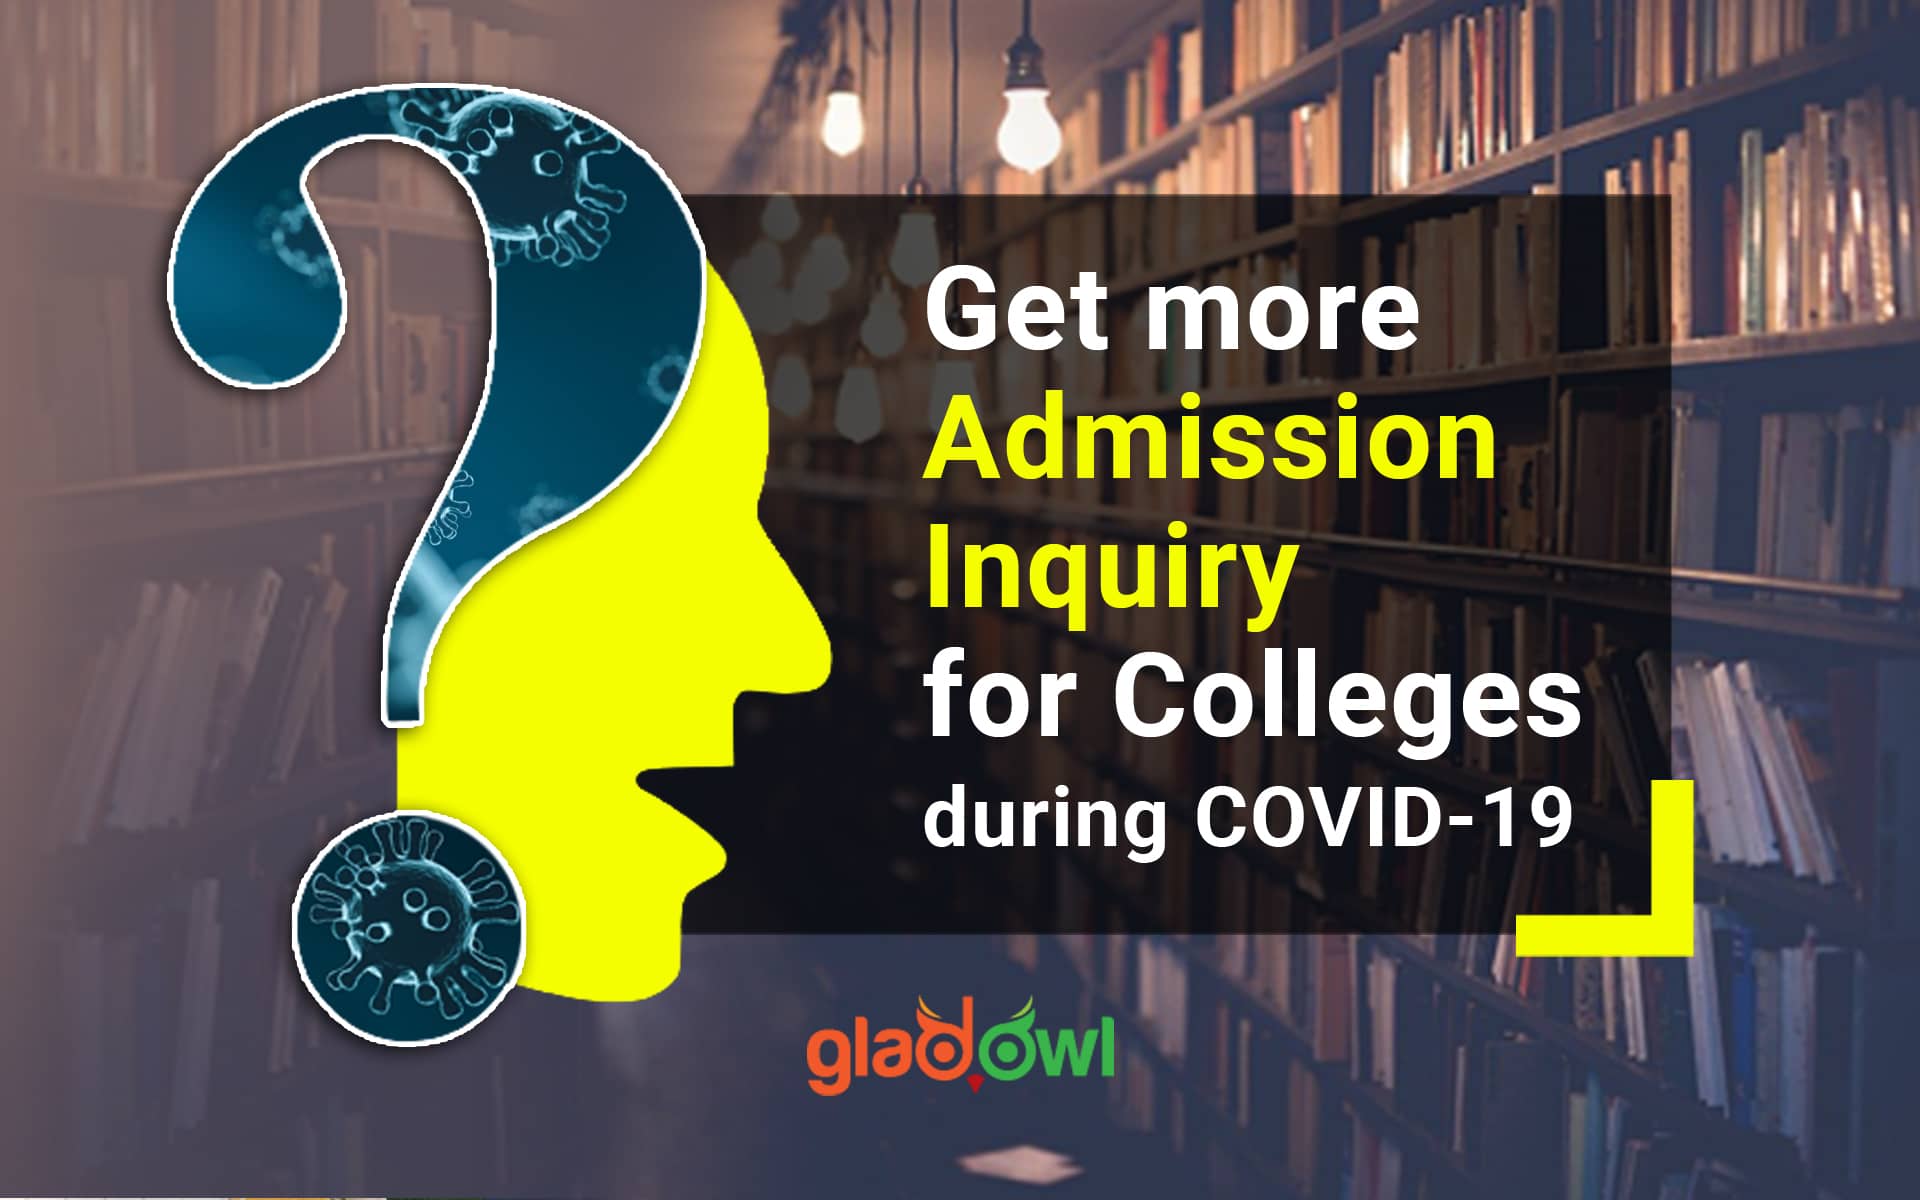 Get More Admission Inquiry for Colleges during COVID-19